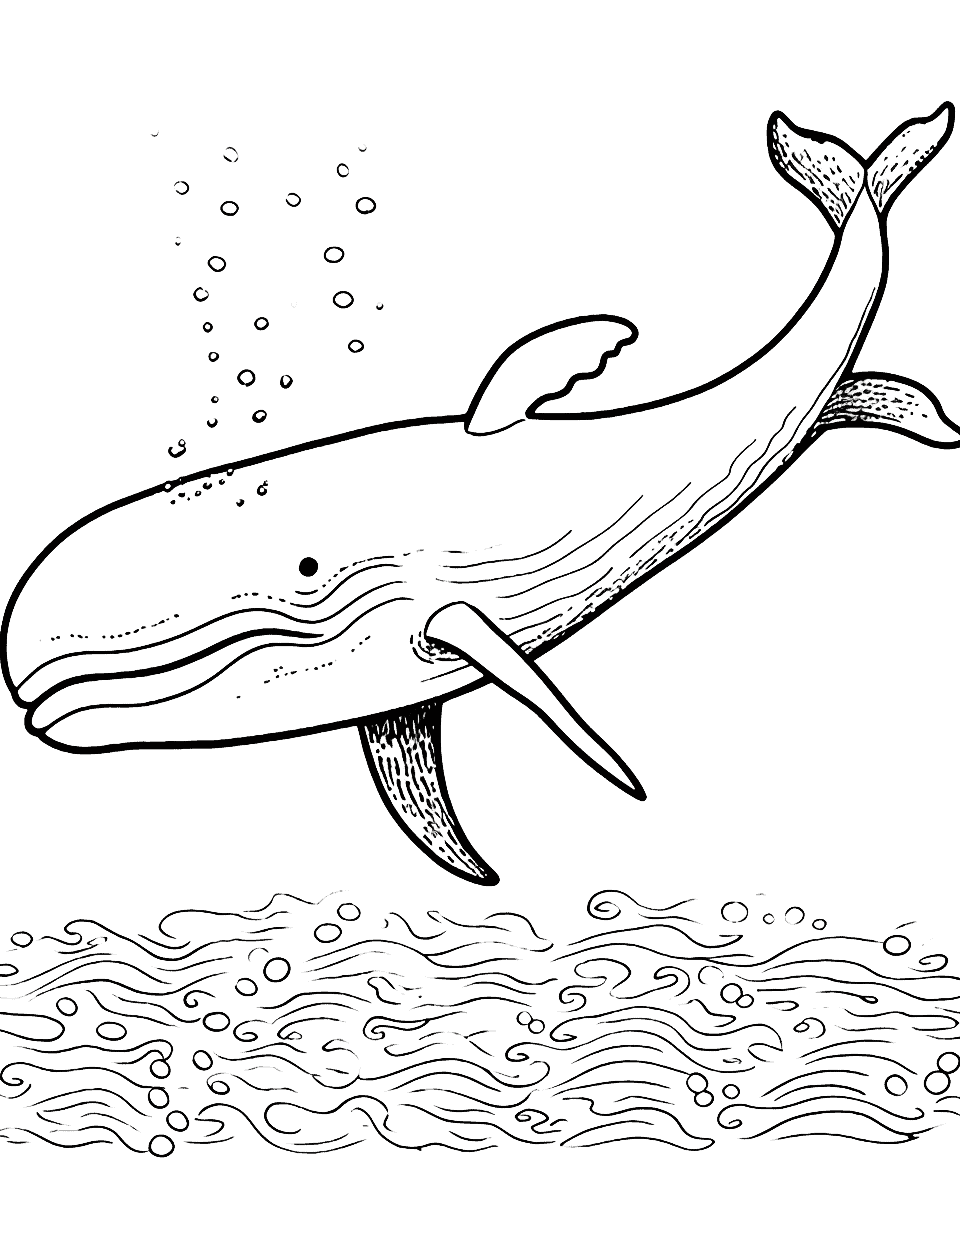 Majestic Whale Animal Coloring Page - A magnificent whale swimming in the deep blue ocean.